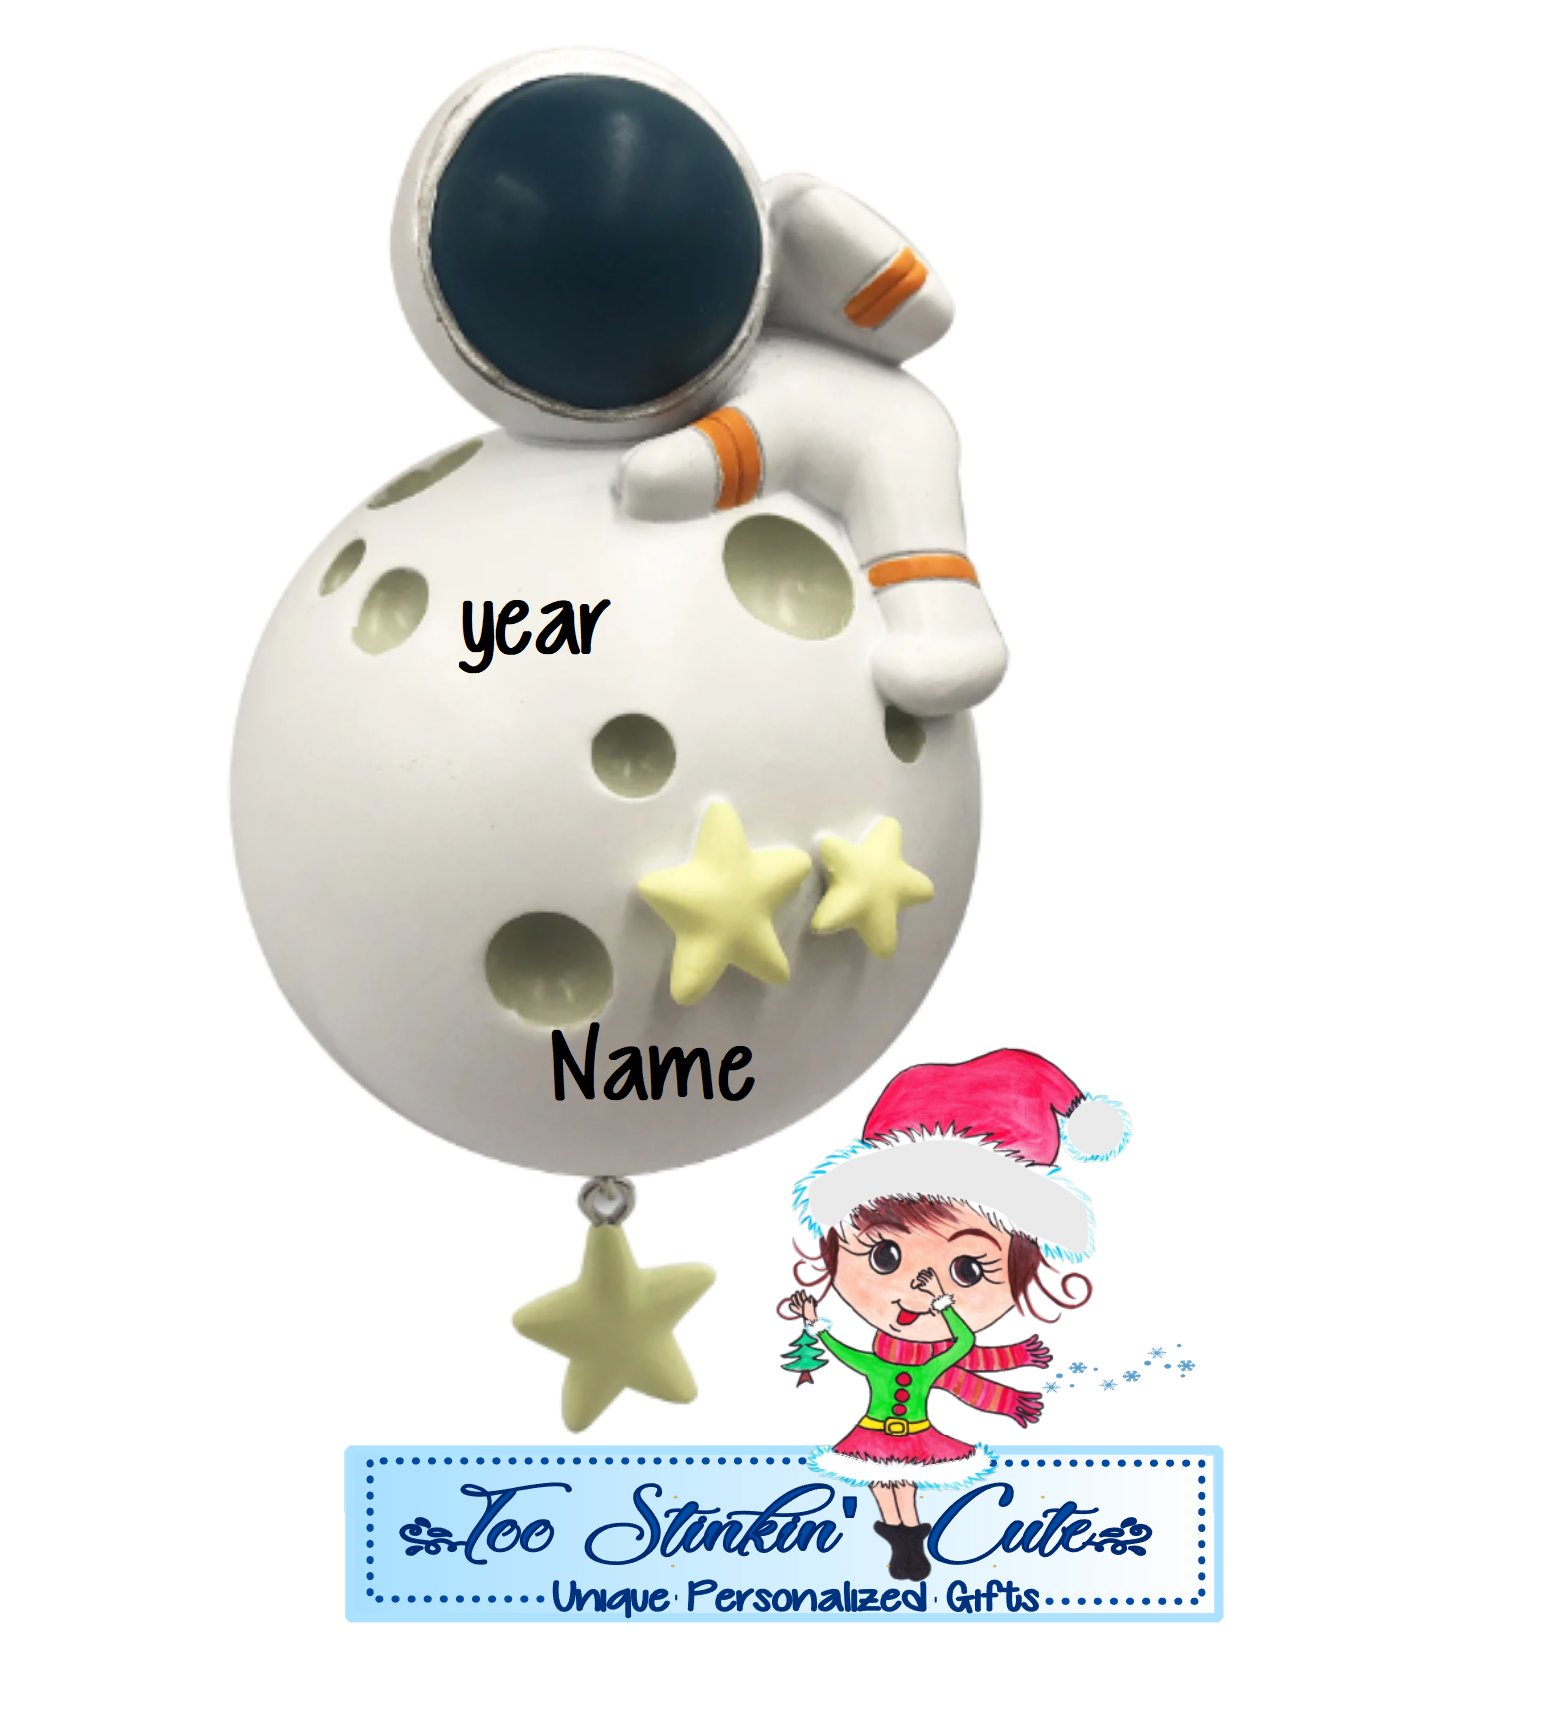 3D Astrounaut Personalized Christmas Ornament|Astronaut Ornament|Space Ornament|Planet Ornament|Rocket Ornament|Outer Space Ornament|Astro